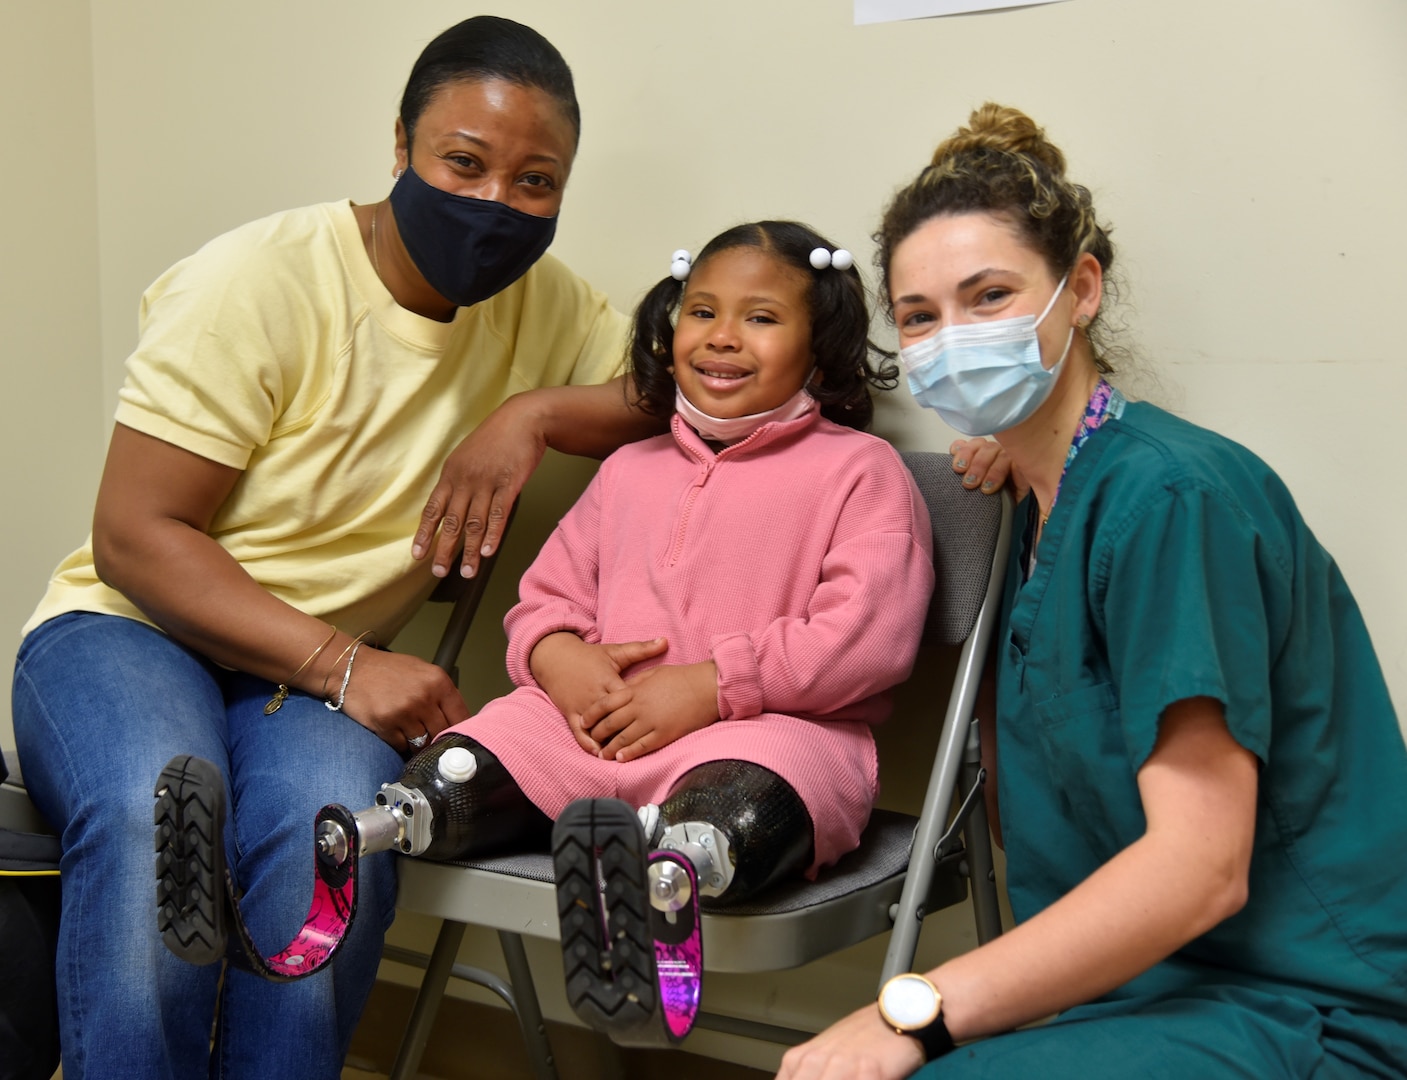 Prosthetic Center of Excellence News: Wishes come true for Bi-Lateral above  knee amputee who receives donations for new limbs!